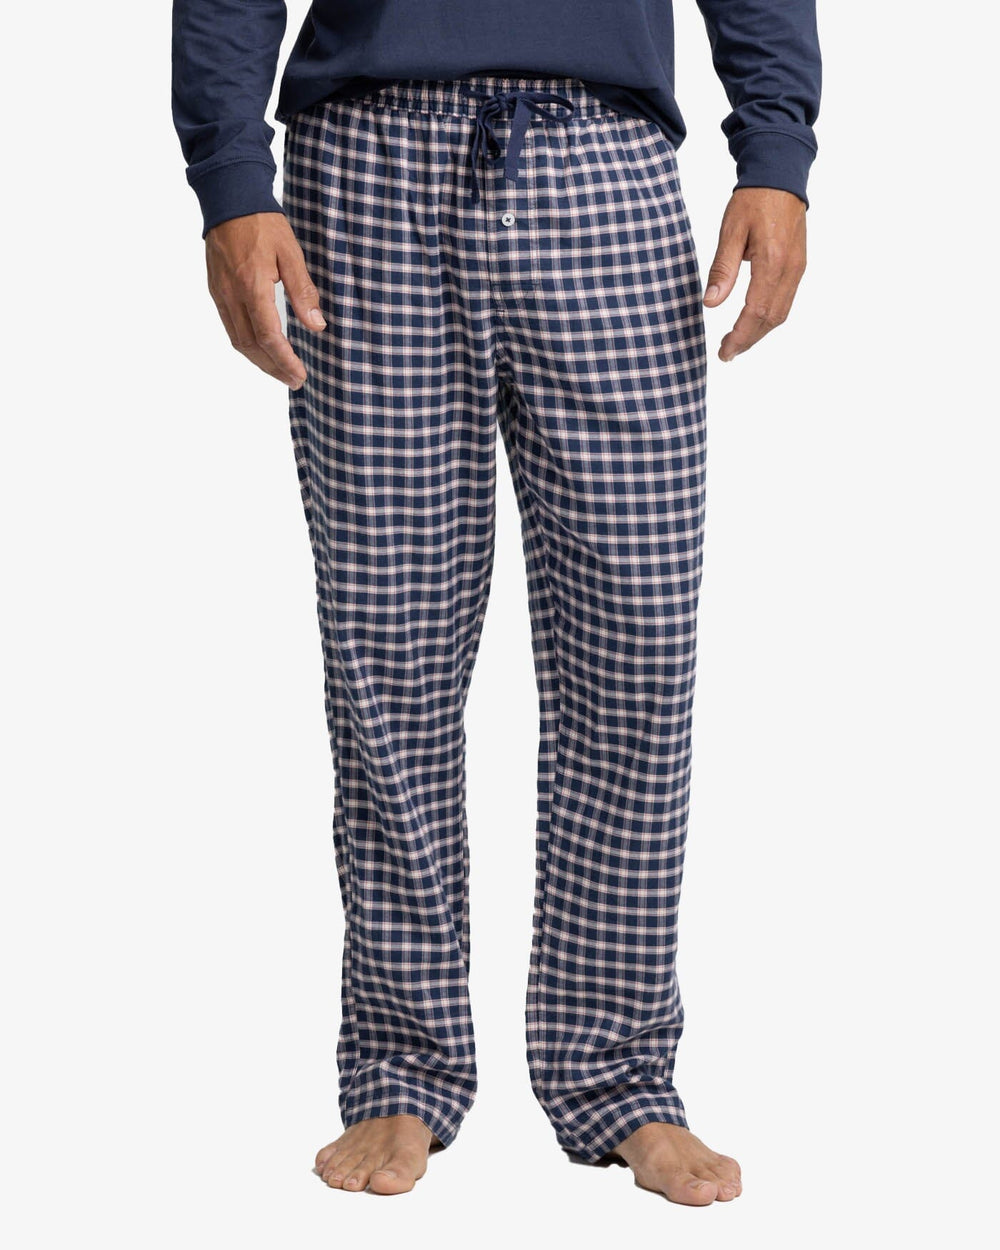 The front view of the Southern Tide Silverleaf Plaid Lounge Pant by Southern Tide - Dress Blue